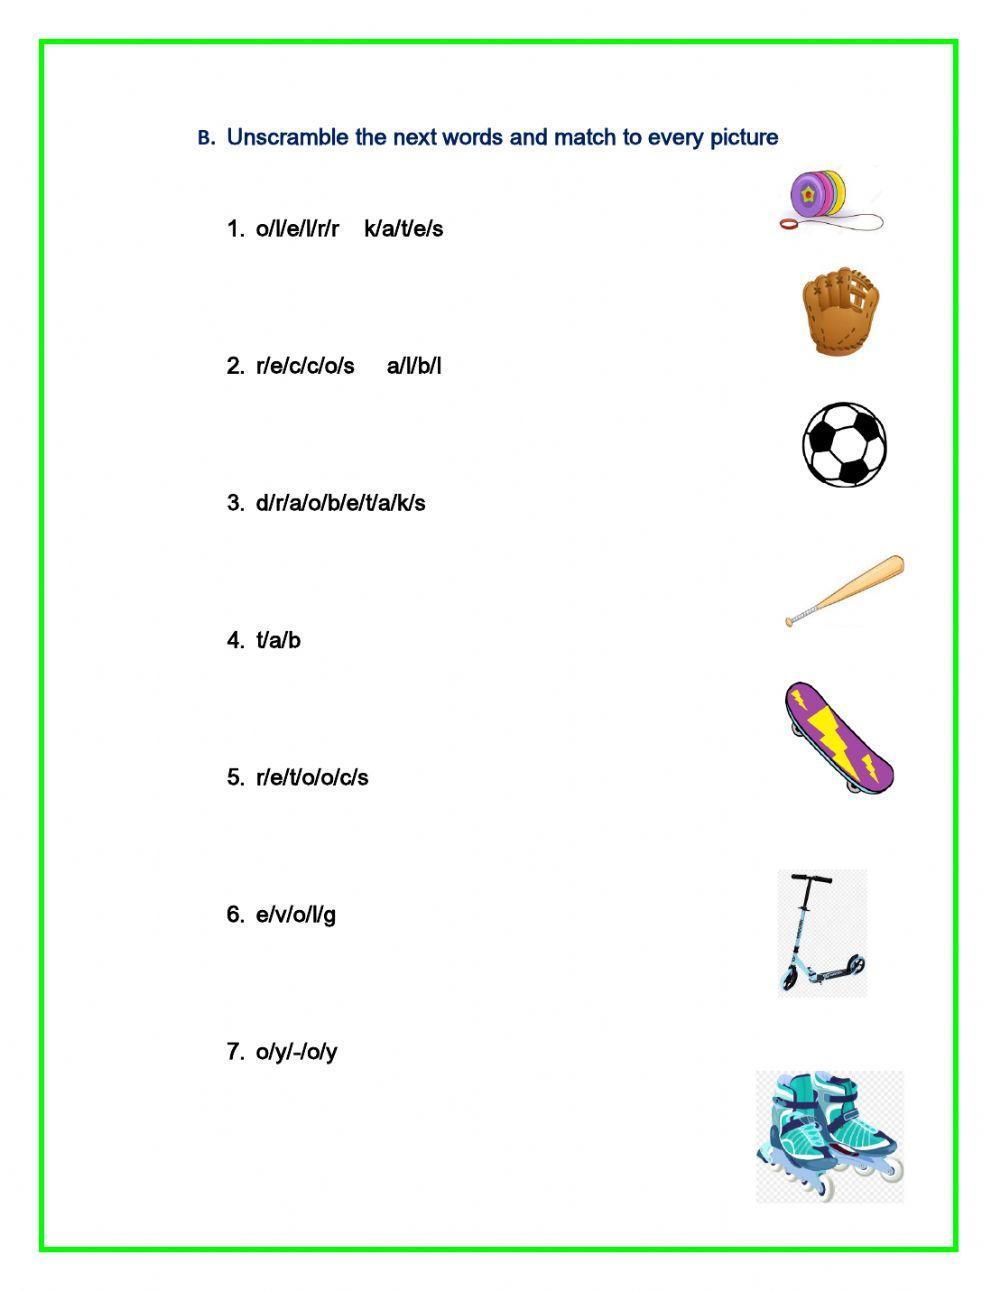 Unit 1 vocabulary quiz (beach and park objects)